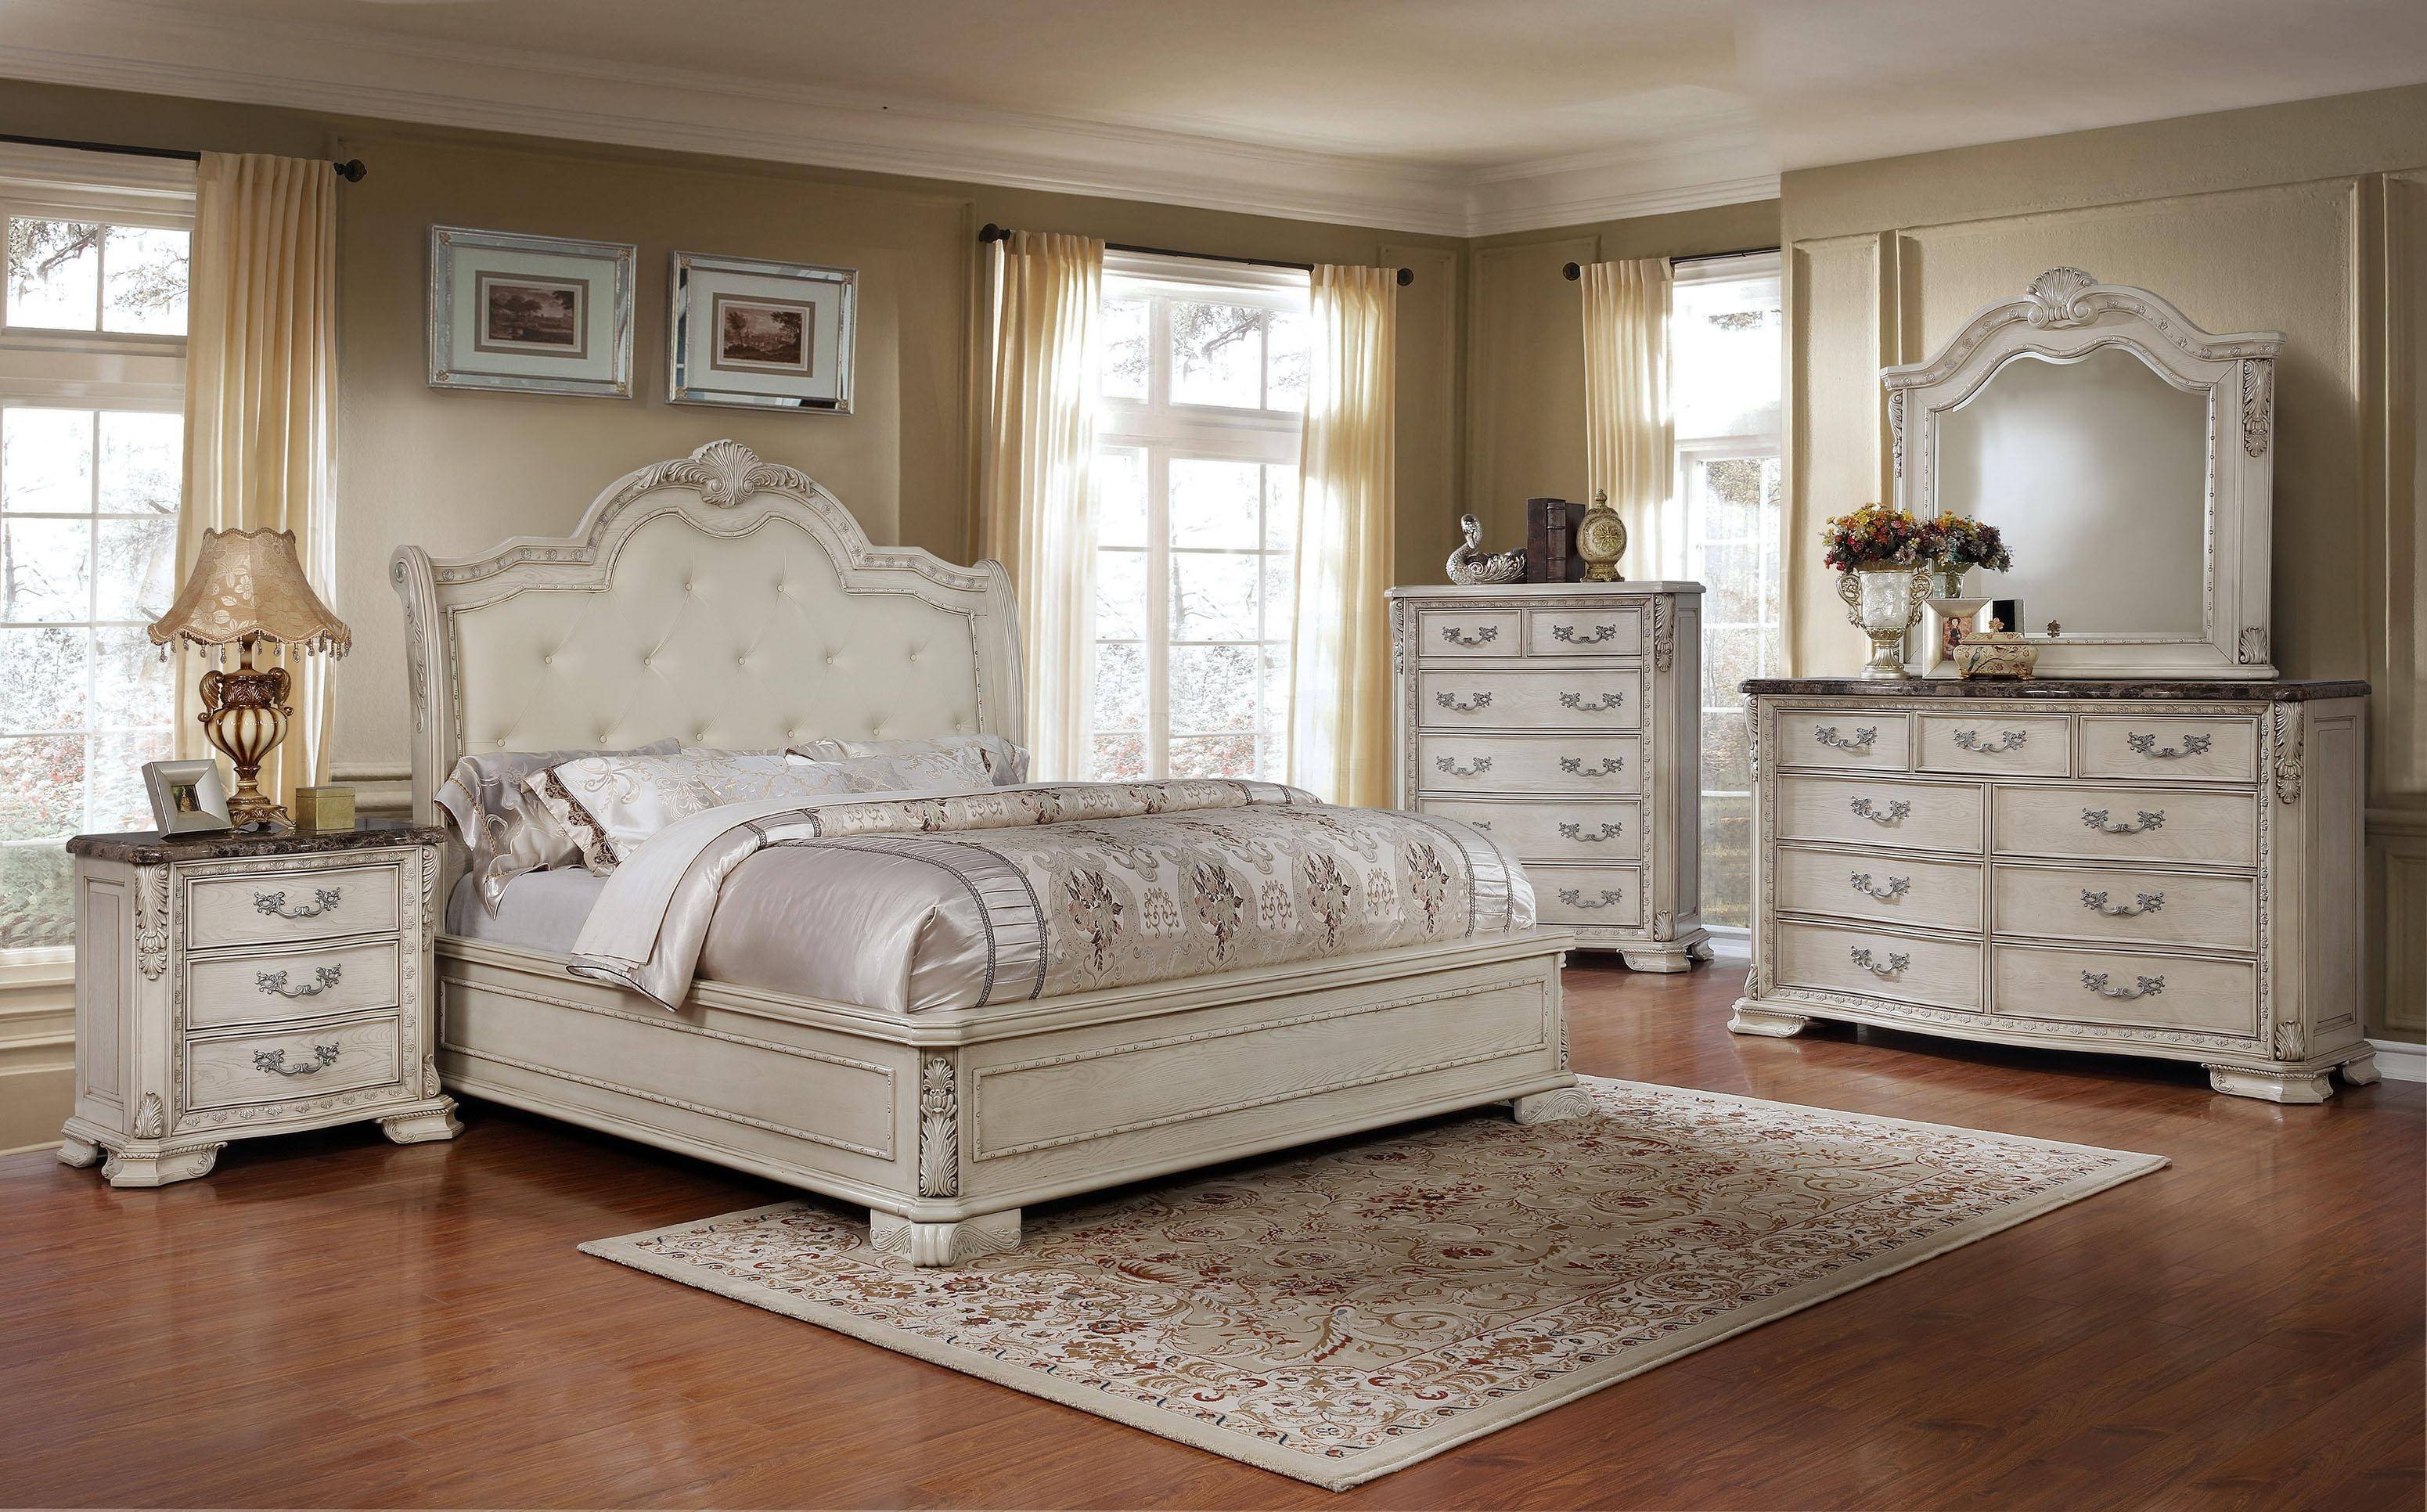 White King Size Bedroom Set Awesome Mcferran B1000 Antique White Tufted King Size Bedroom Set